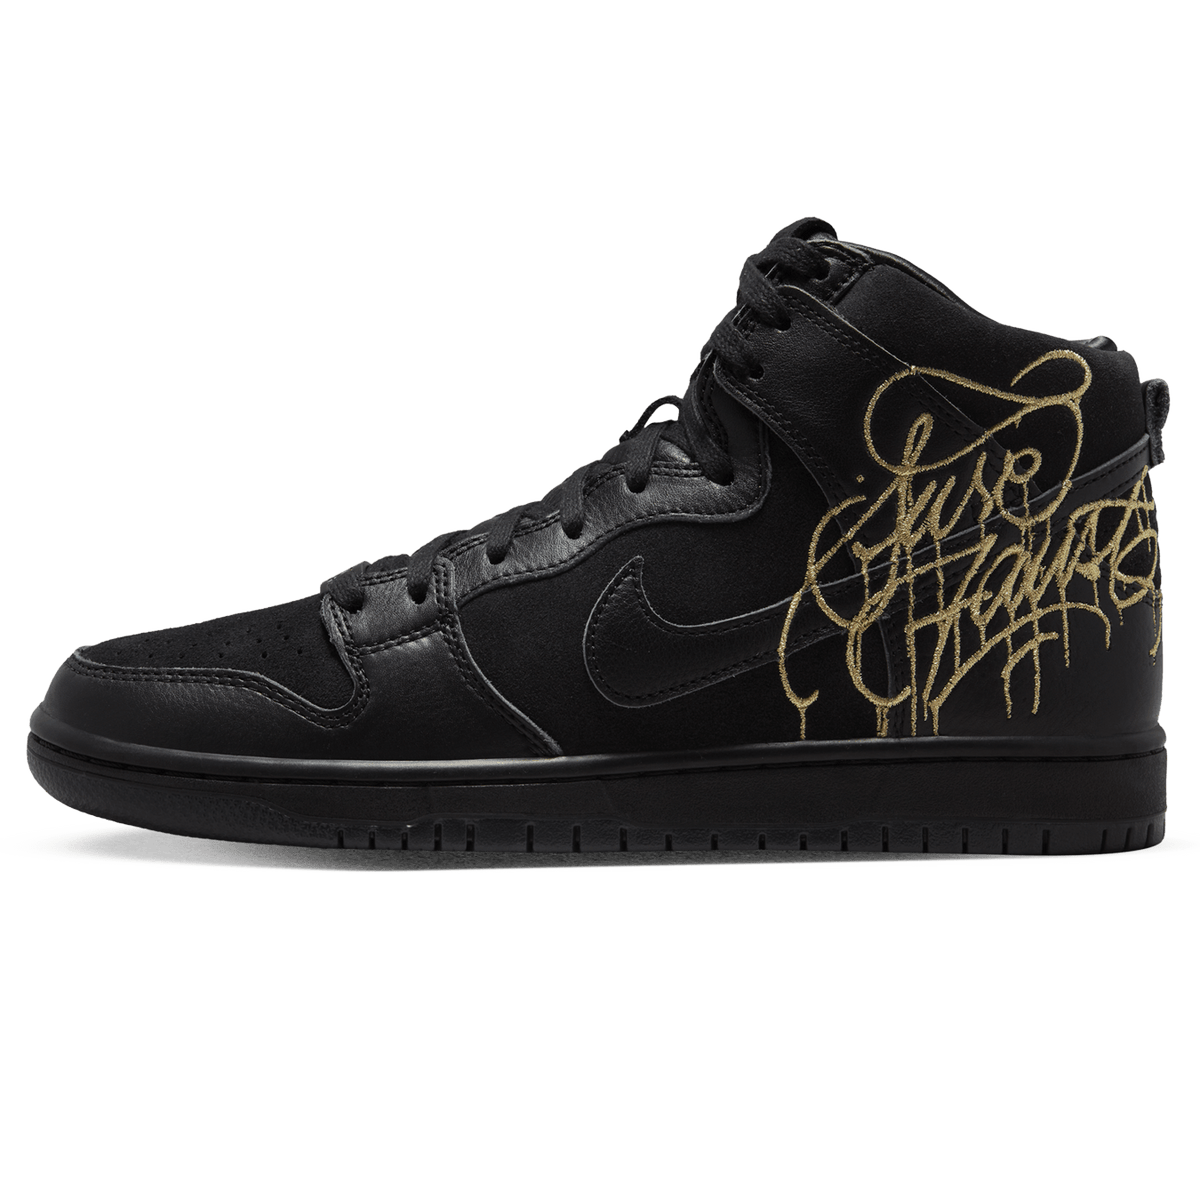 FAUST x book Nike Dunk High SB 'The Devil is in The Details' - JuzsportsShops